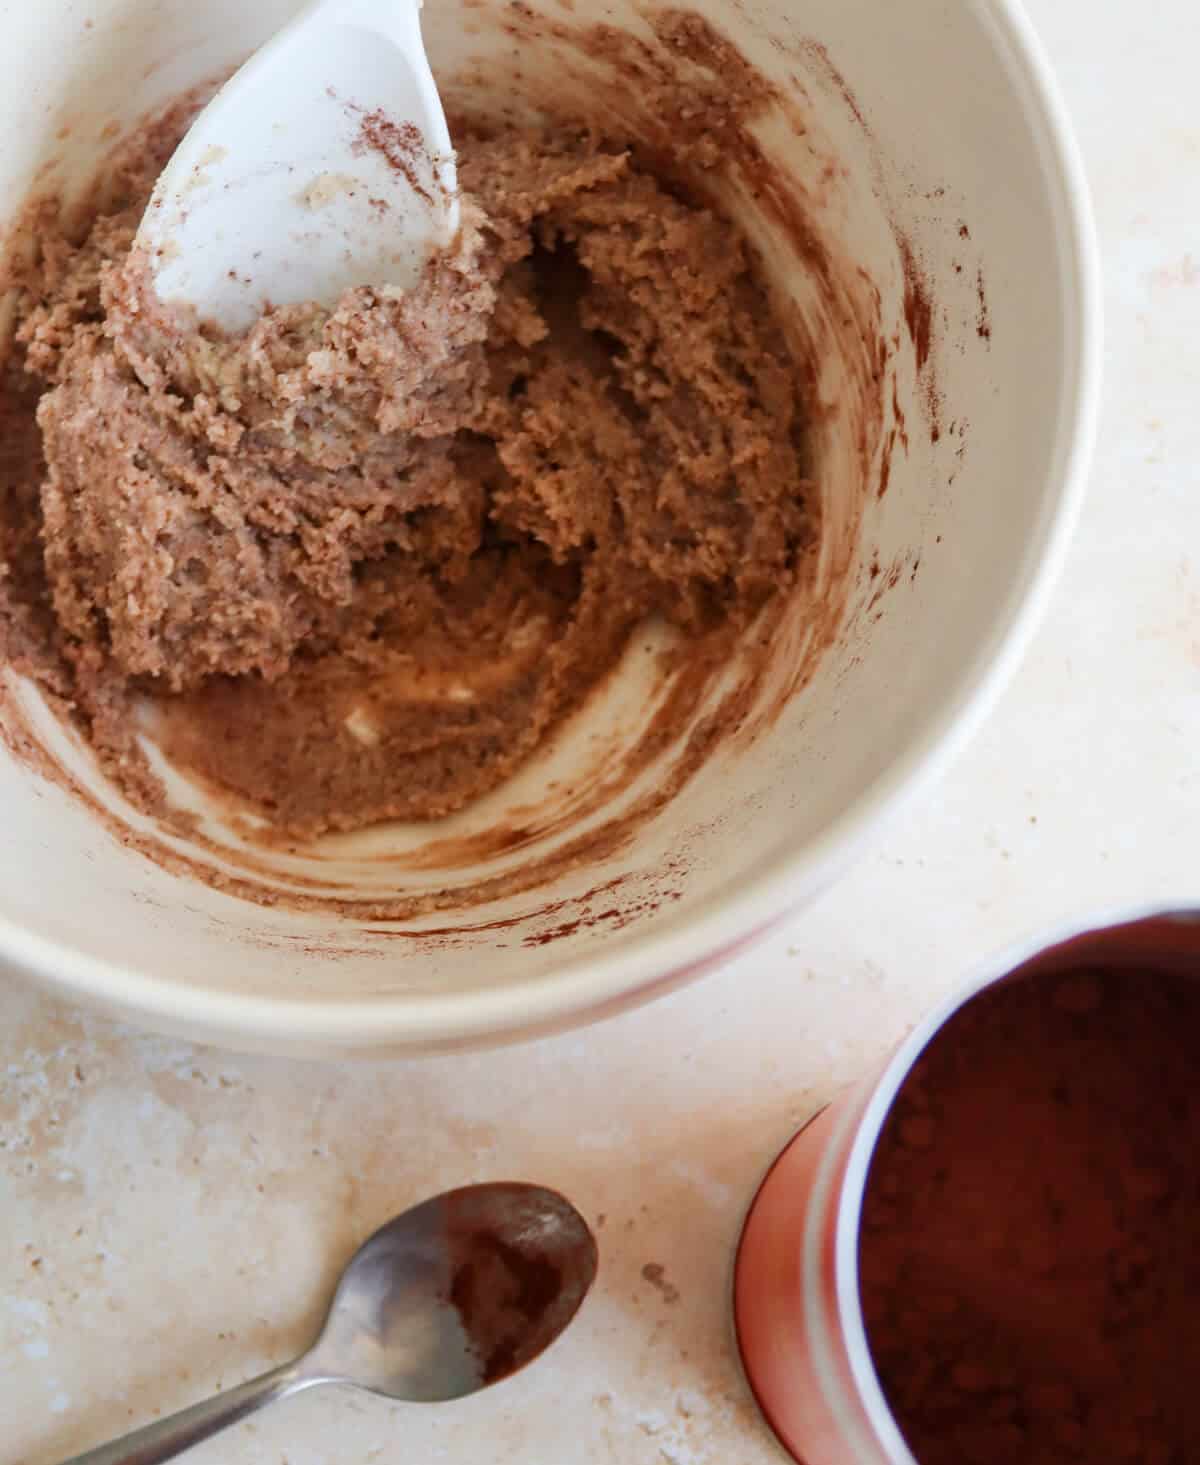 Almond and hazelnut paste in a bowl next to a pot of cocoa powder.